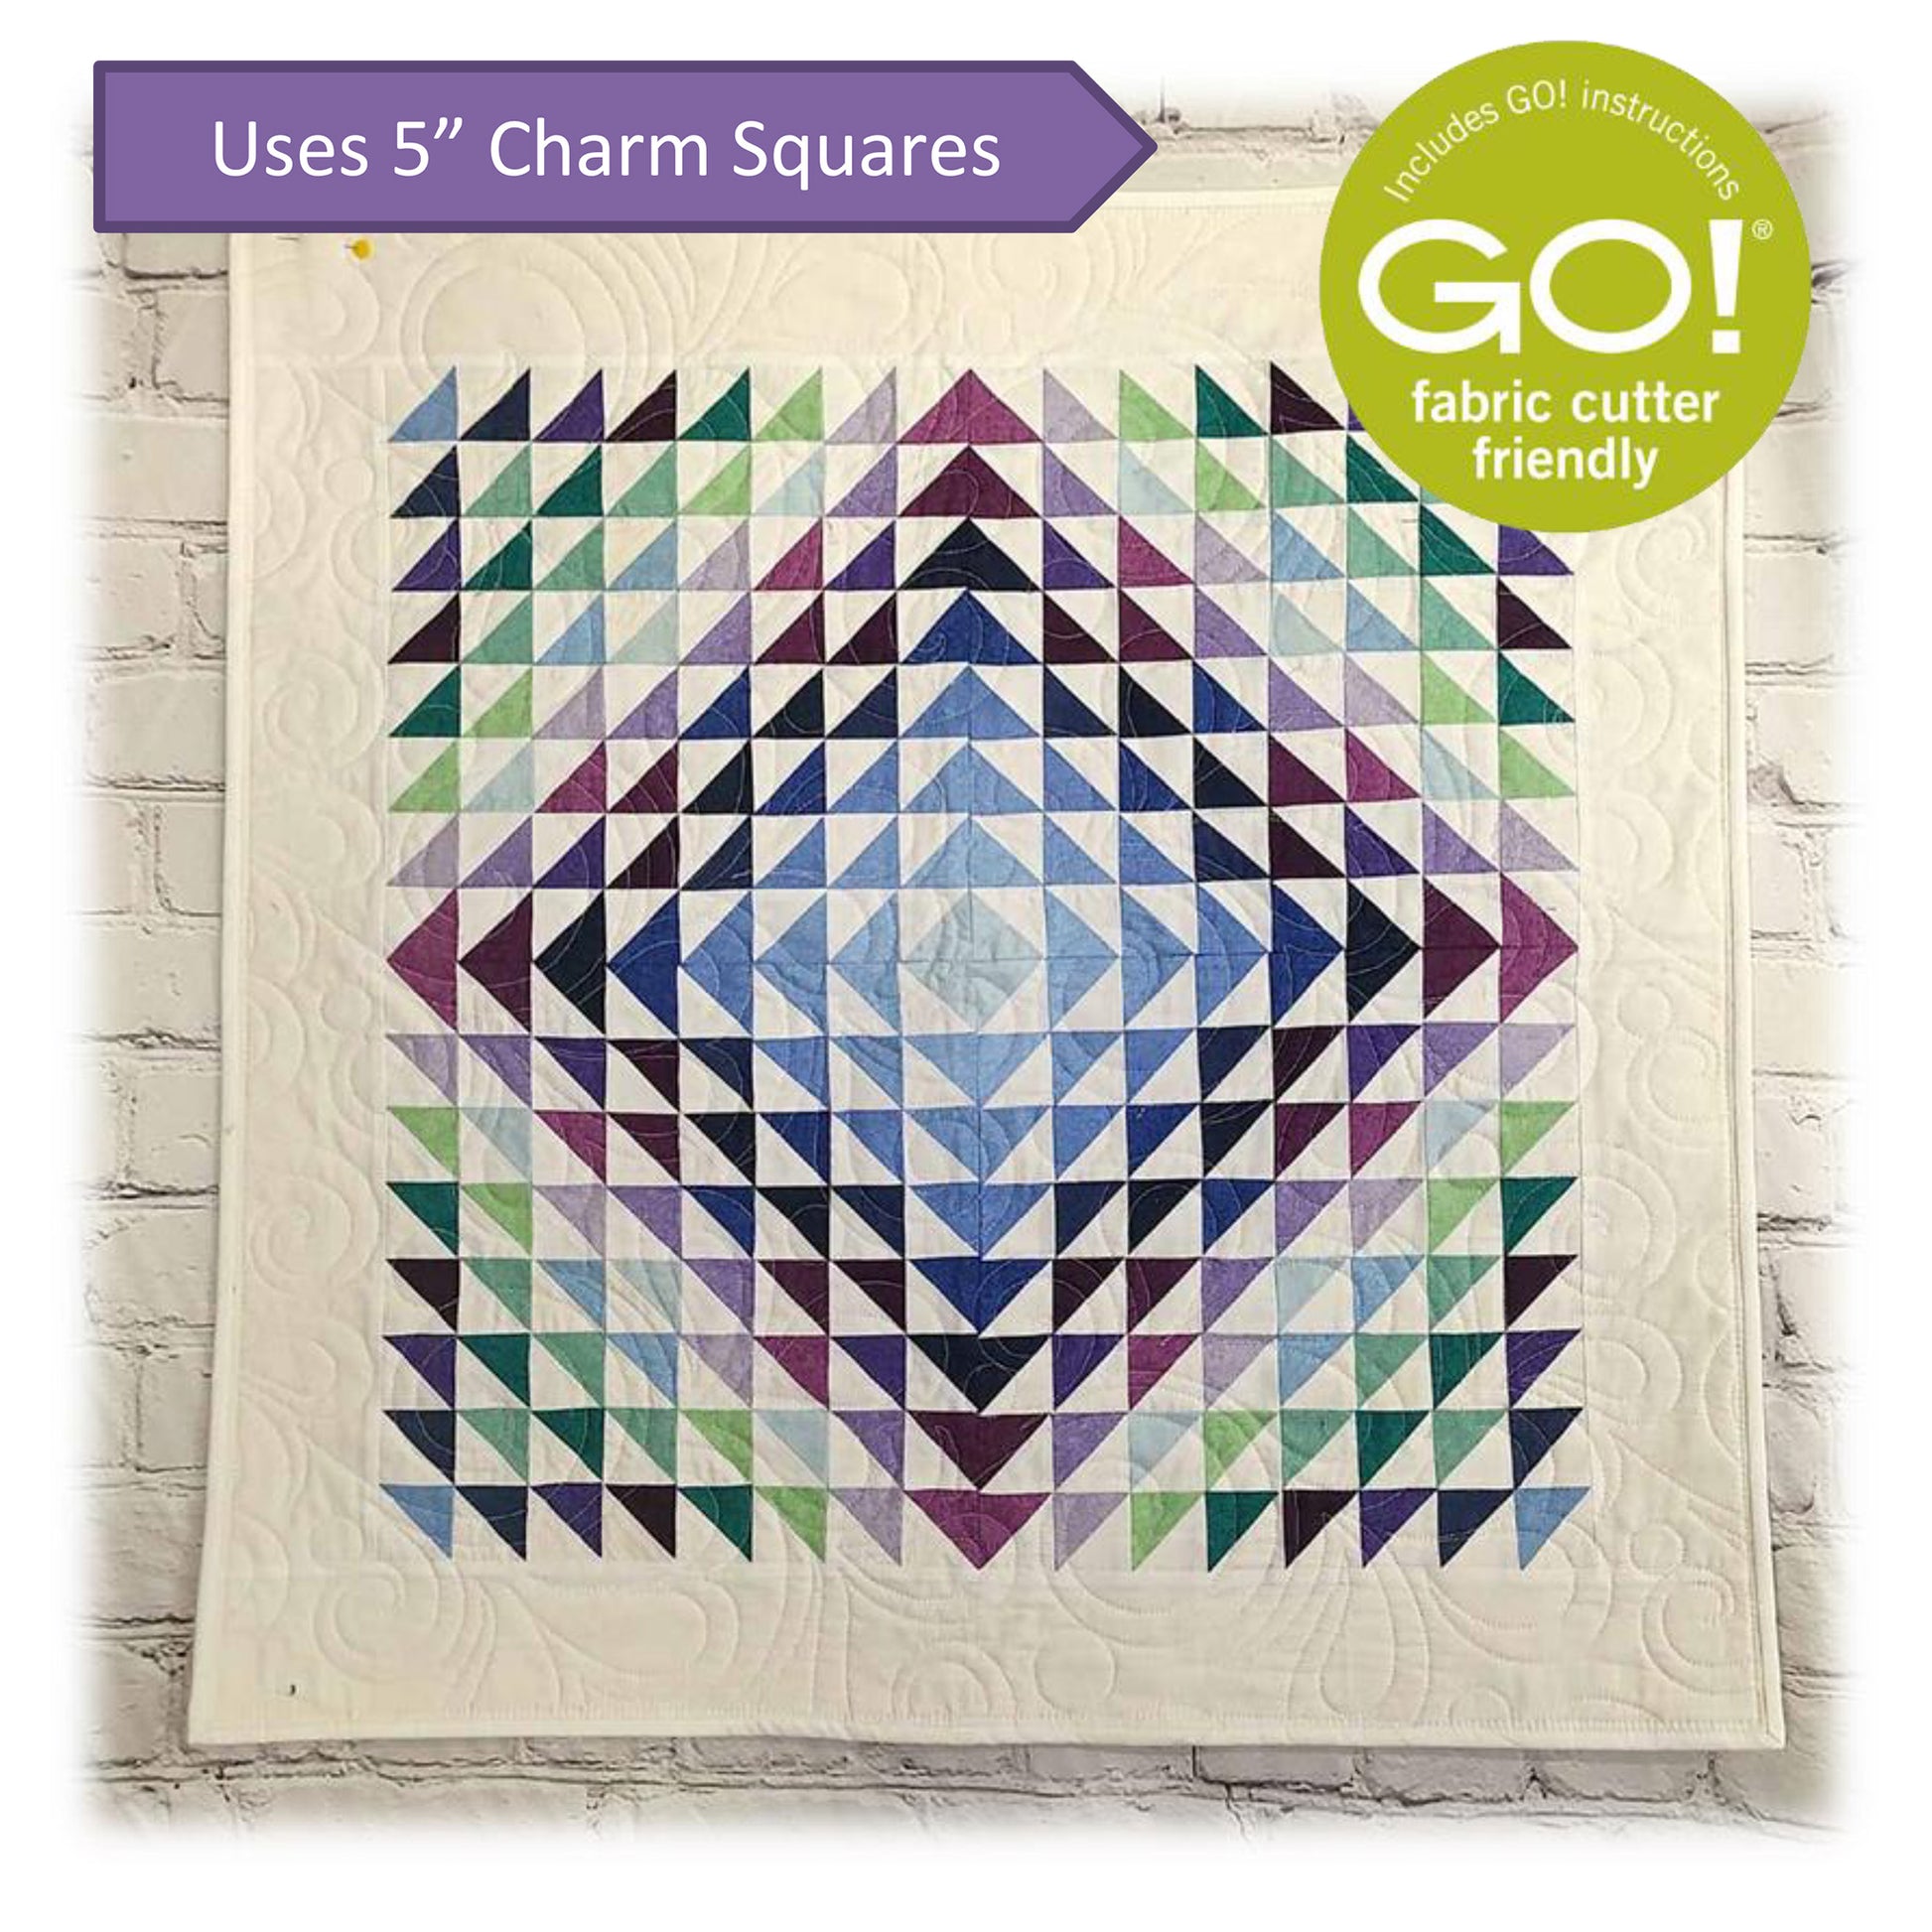 Colorful quilt with purple and green triangle design with note about this pattern being Accuquilt GO! fabric cutter friendly and that it uses 5-inch charm squares.